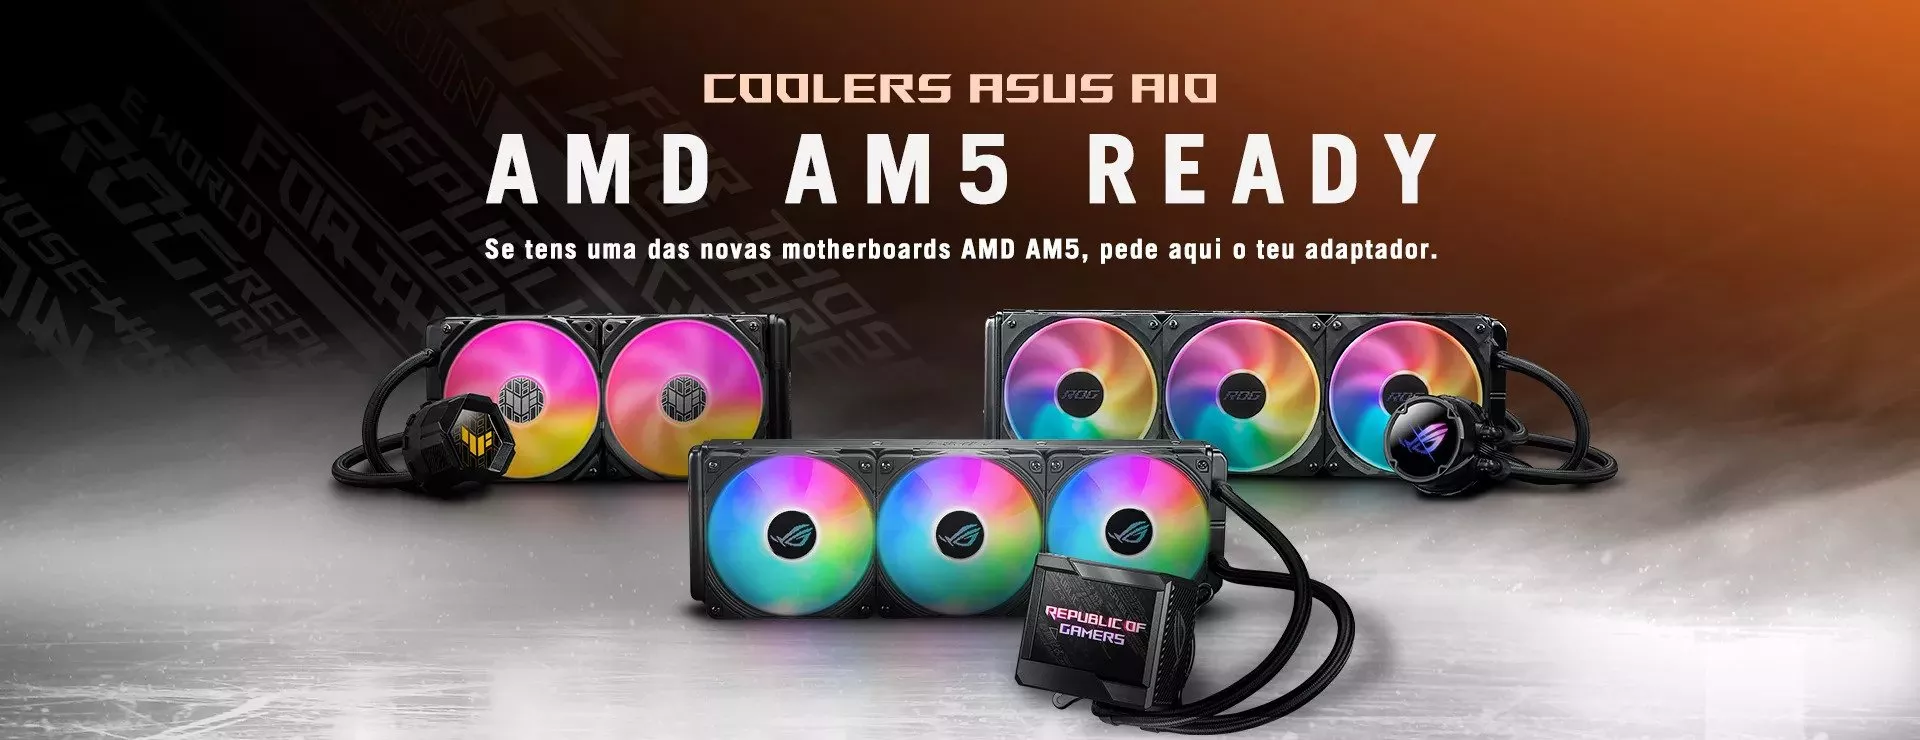 AiO Coolers - AMD AM5 Ready